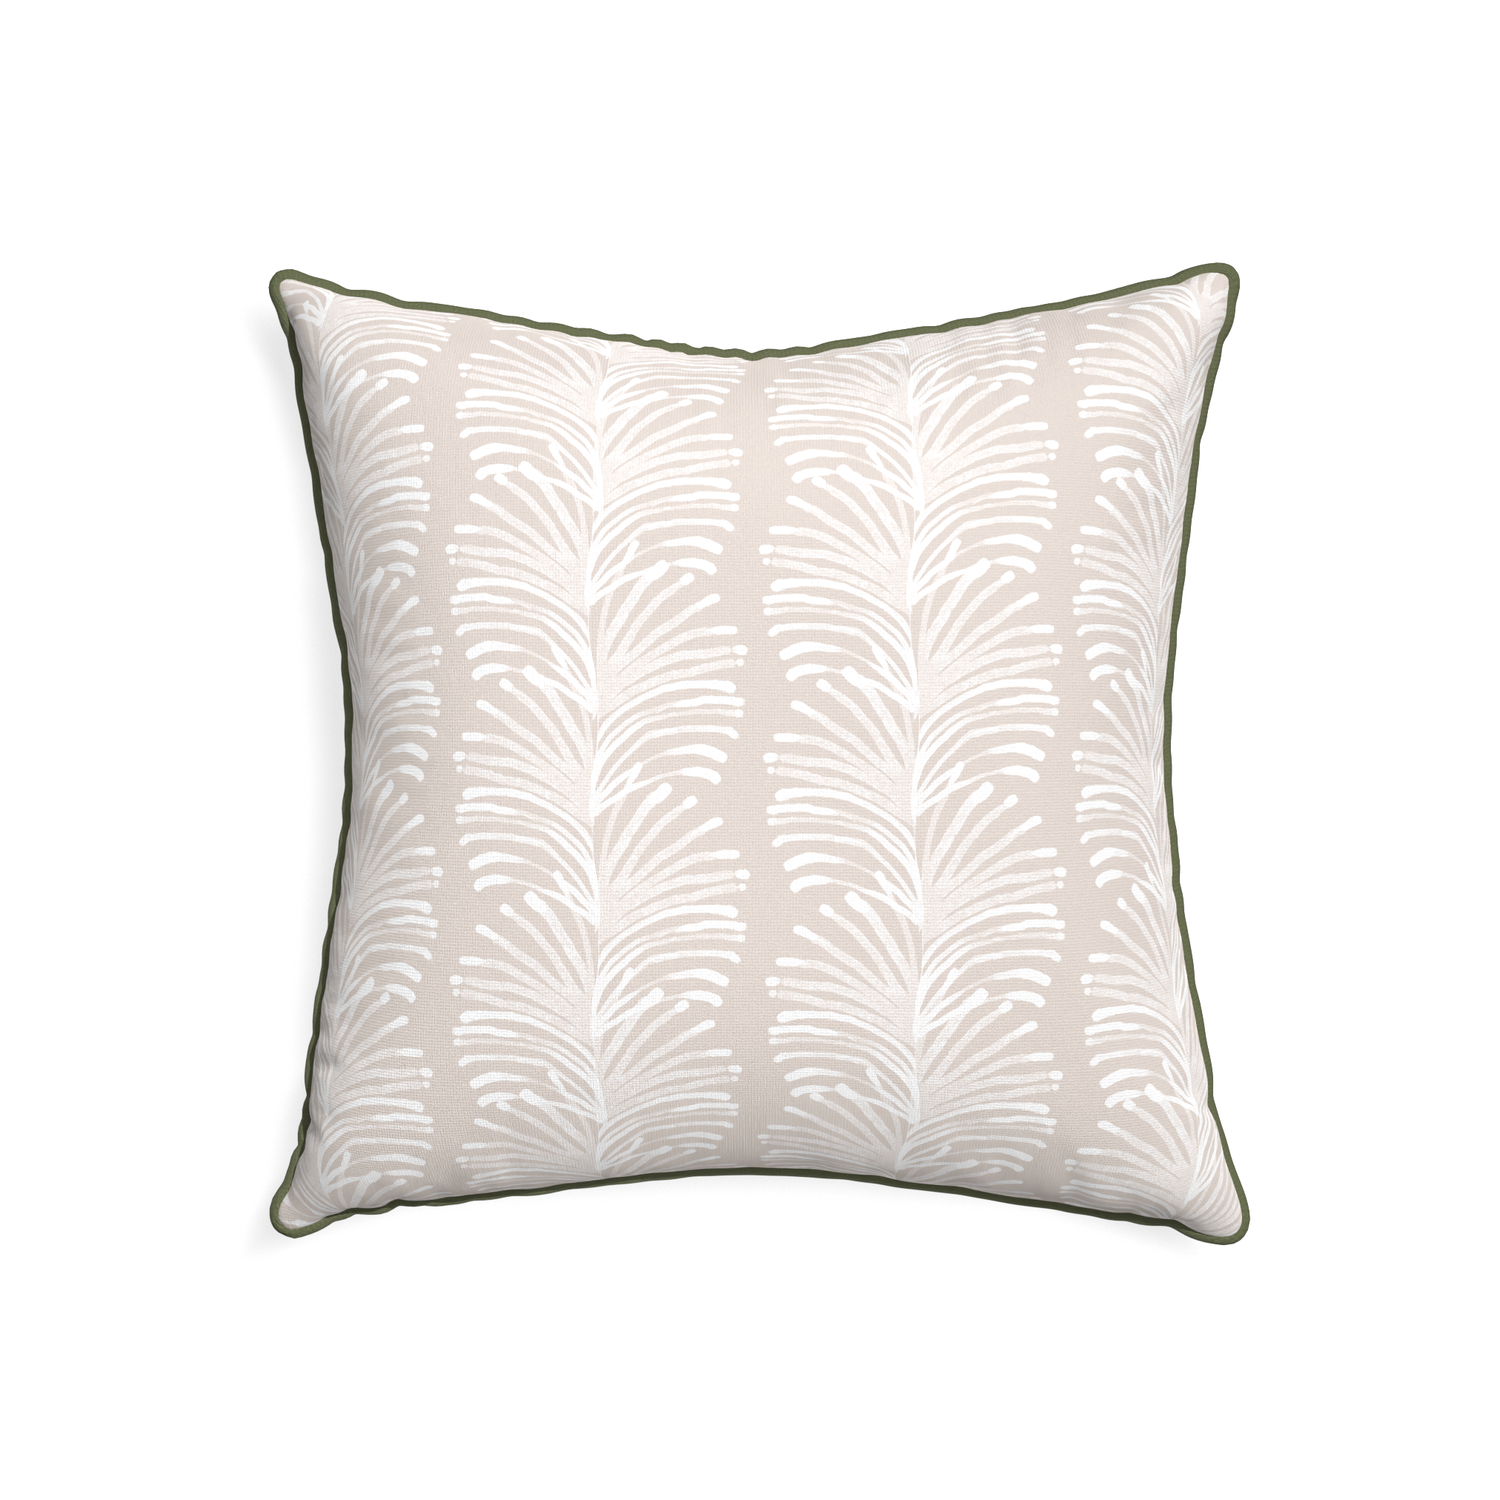 22-square emma sand custom pillow with f piping on white background